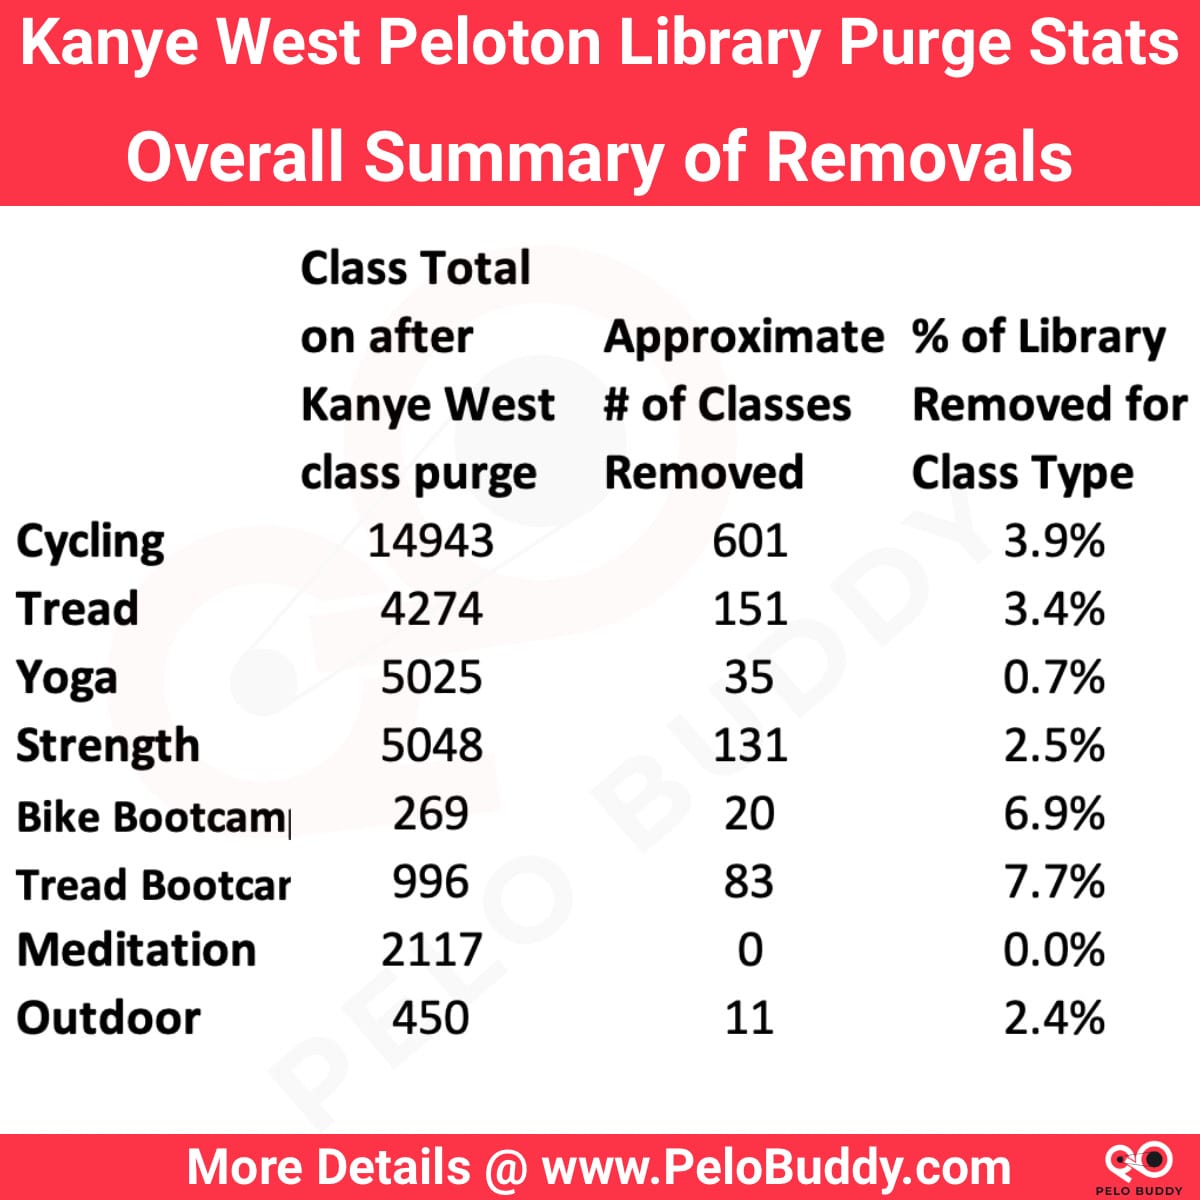 Stats about the removal of Peloton classes with Kanye West music. This purge took place in December 2022.